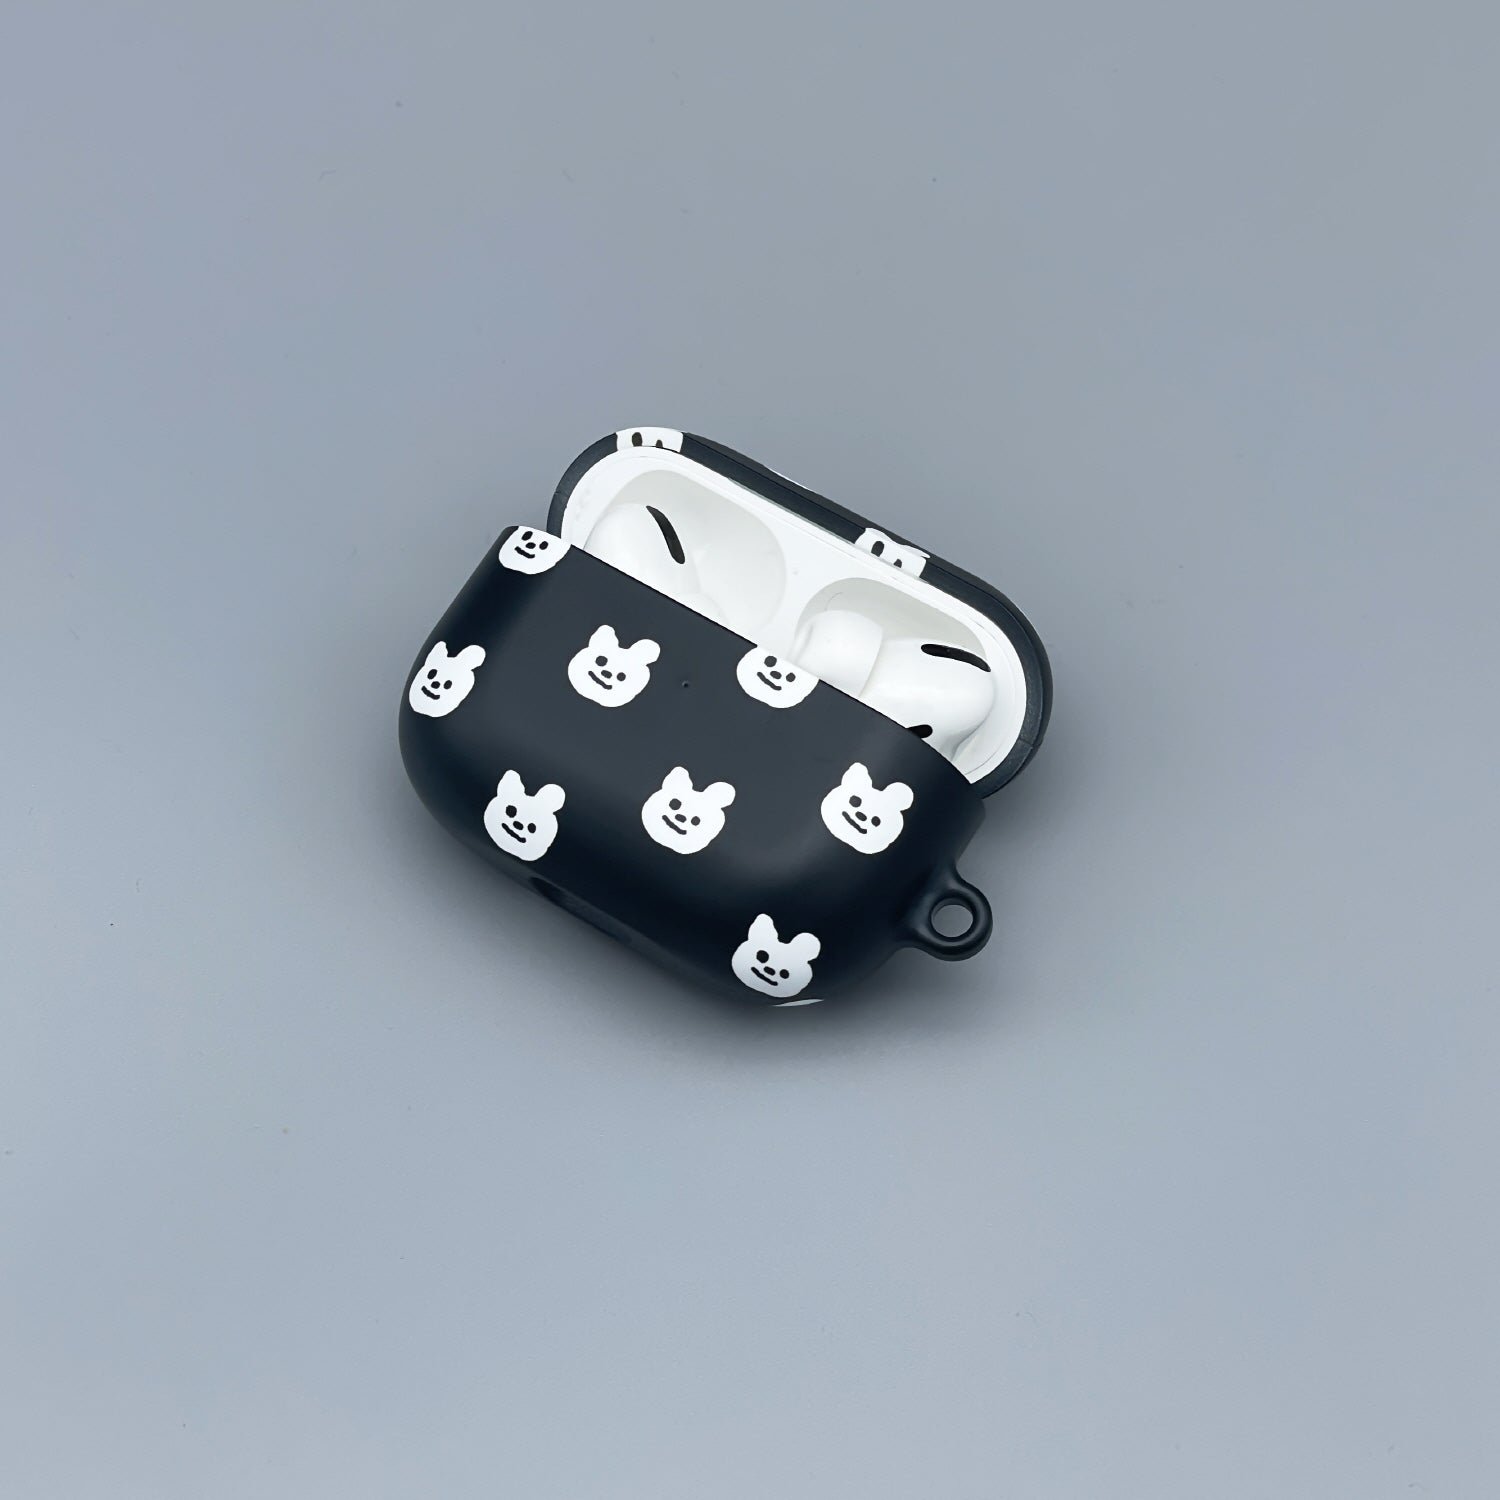 Snow pattern airpods case